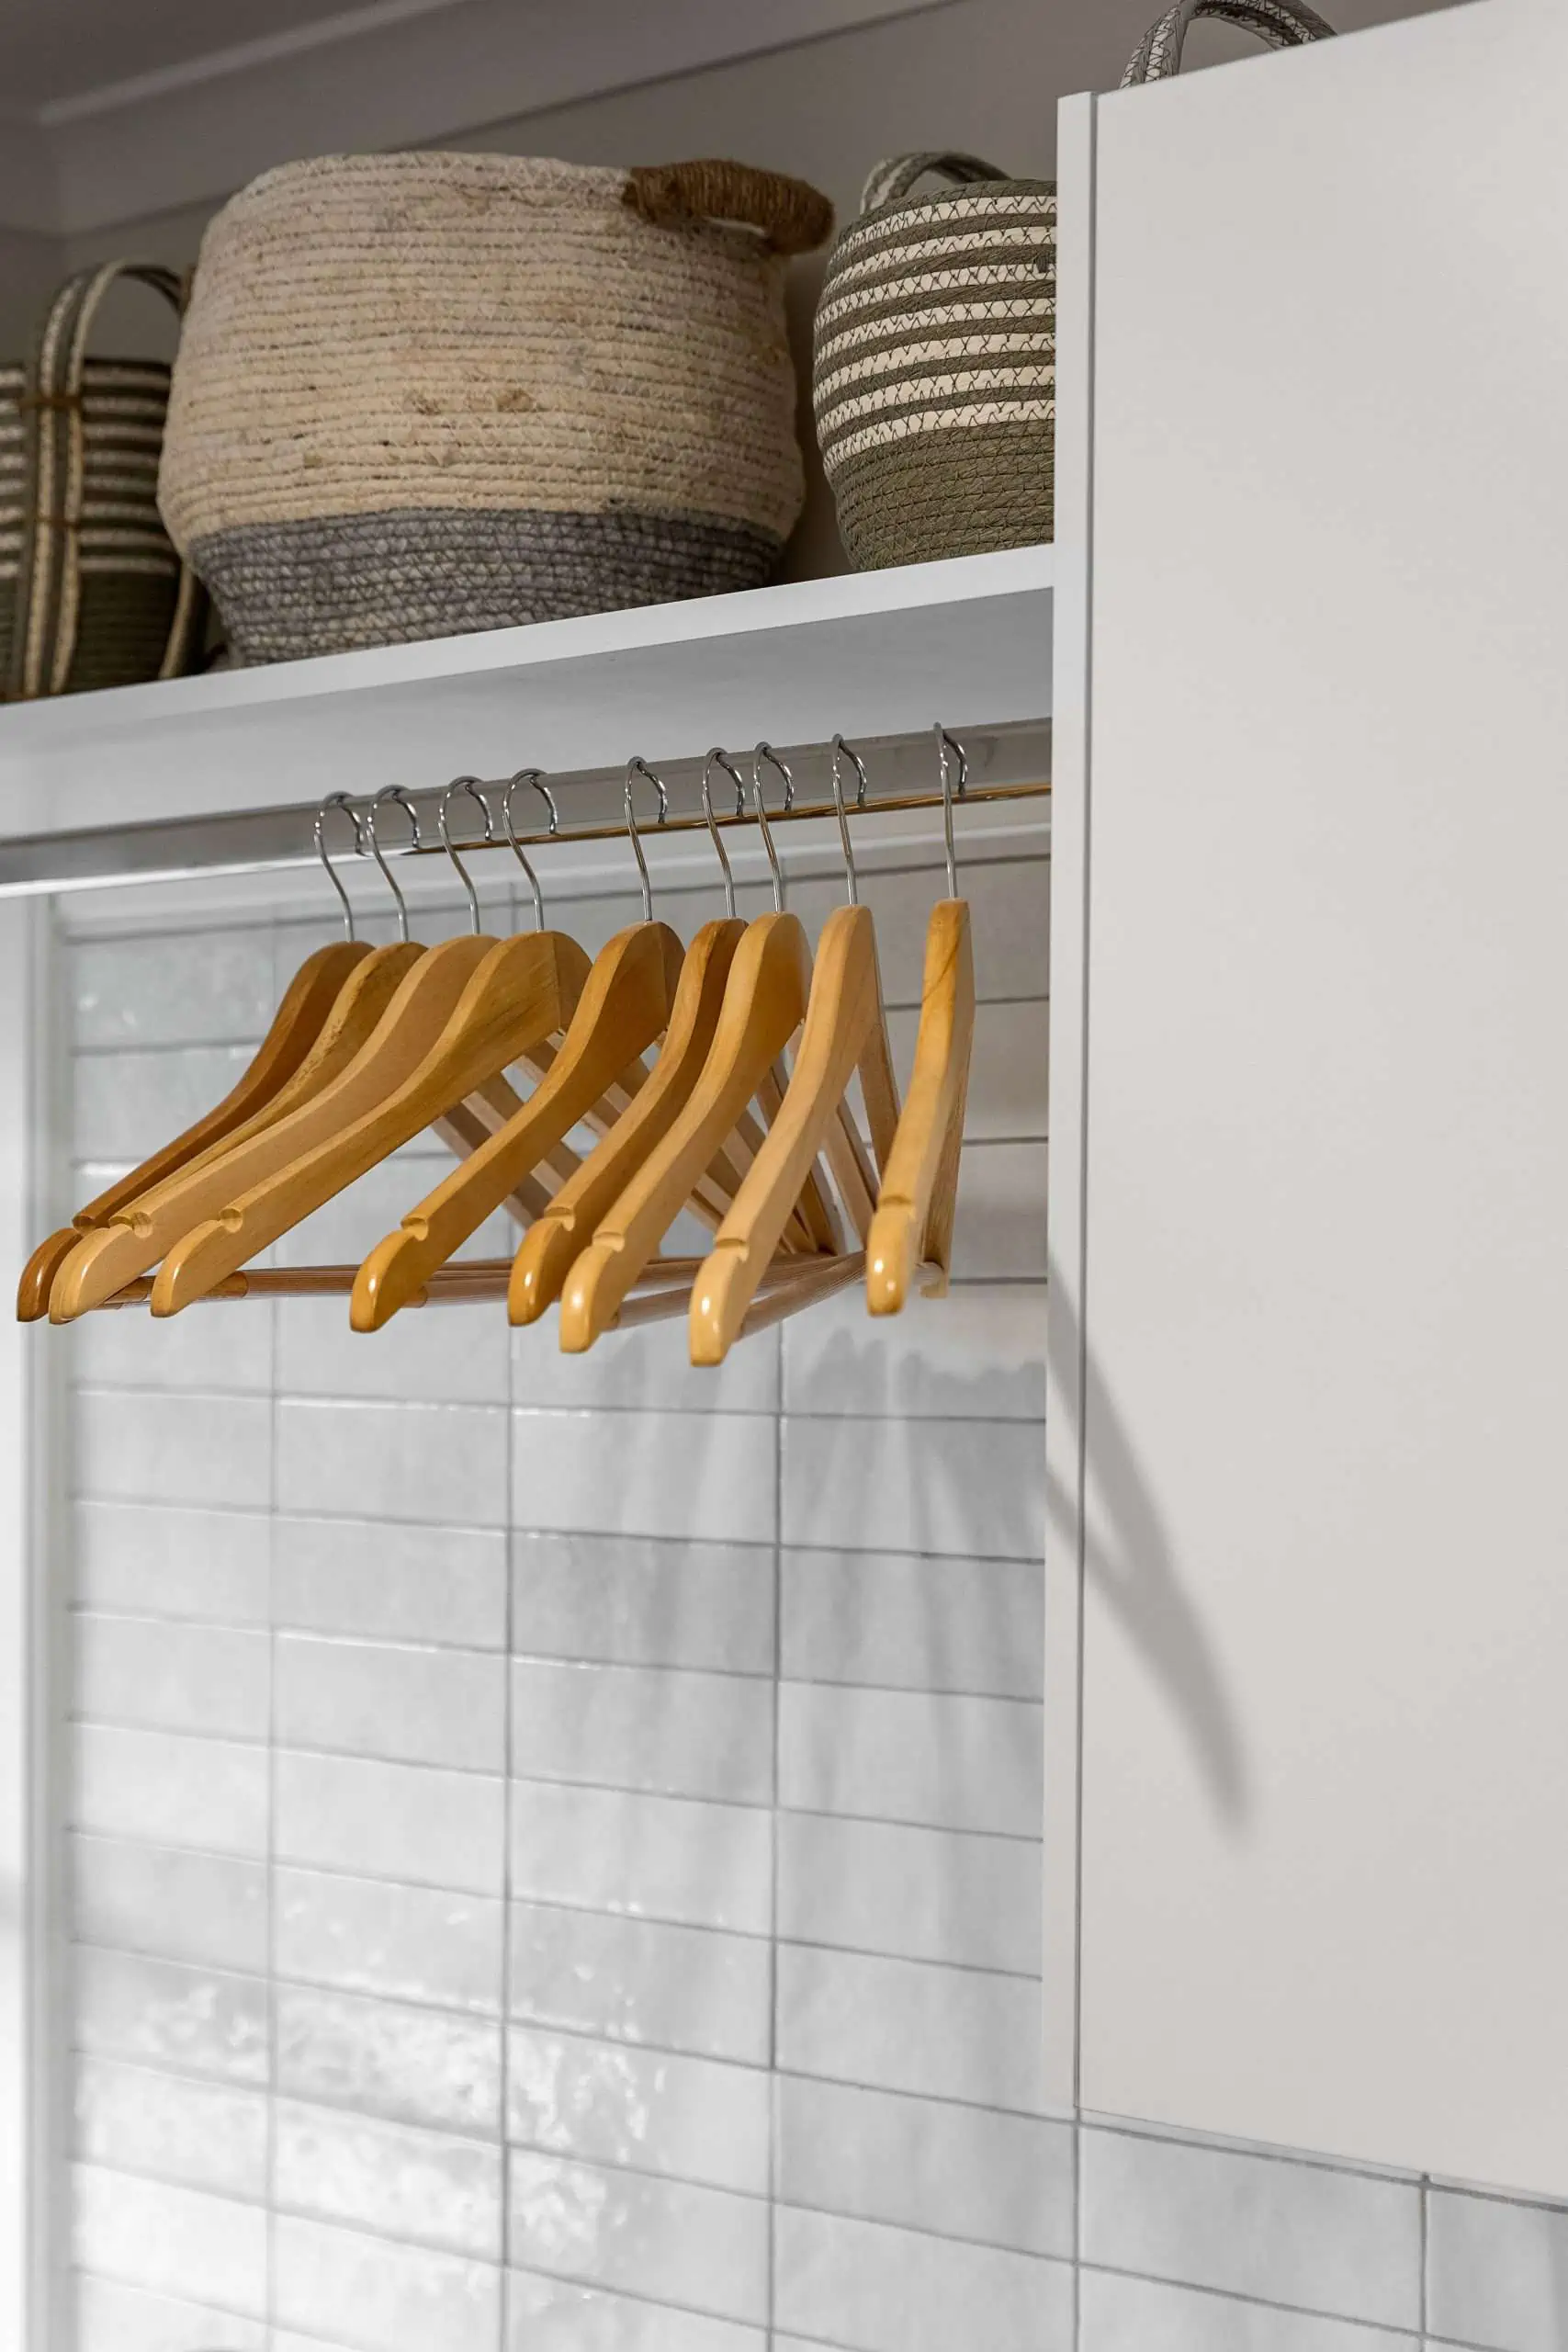 Close up of wooden hangers in a modern laundry space